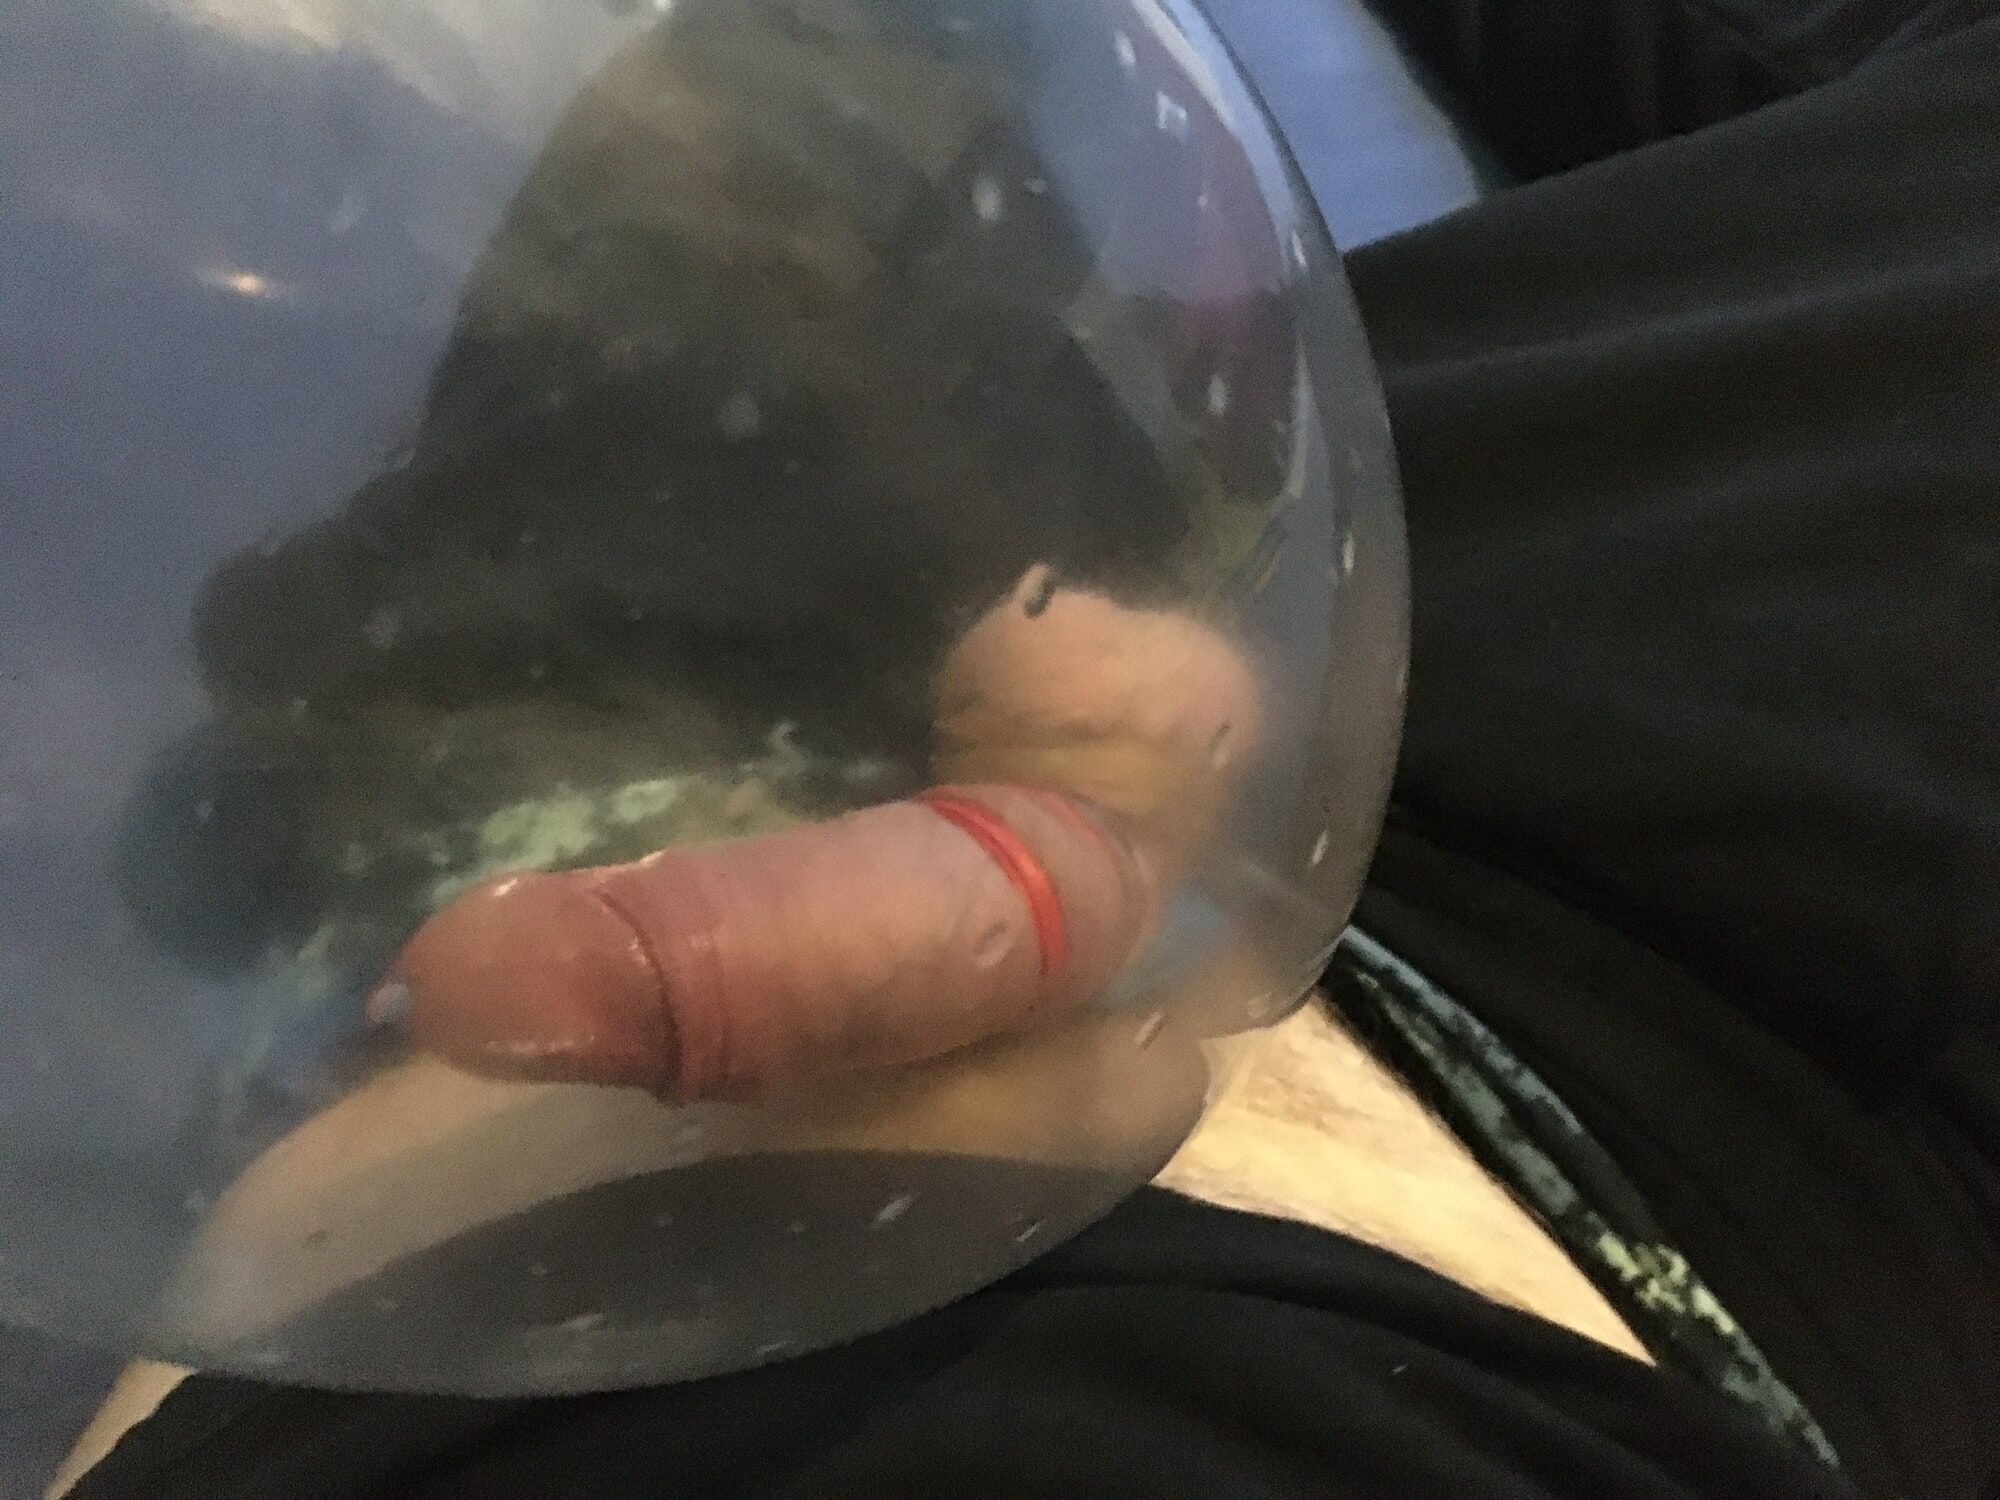  Haired Dick And Balls With Rubber Bands Condom Ballon  fuck #32